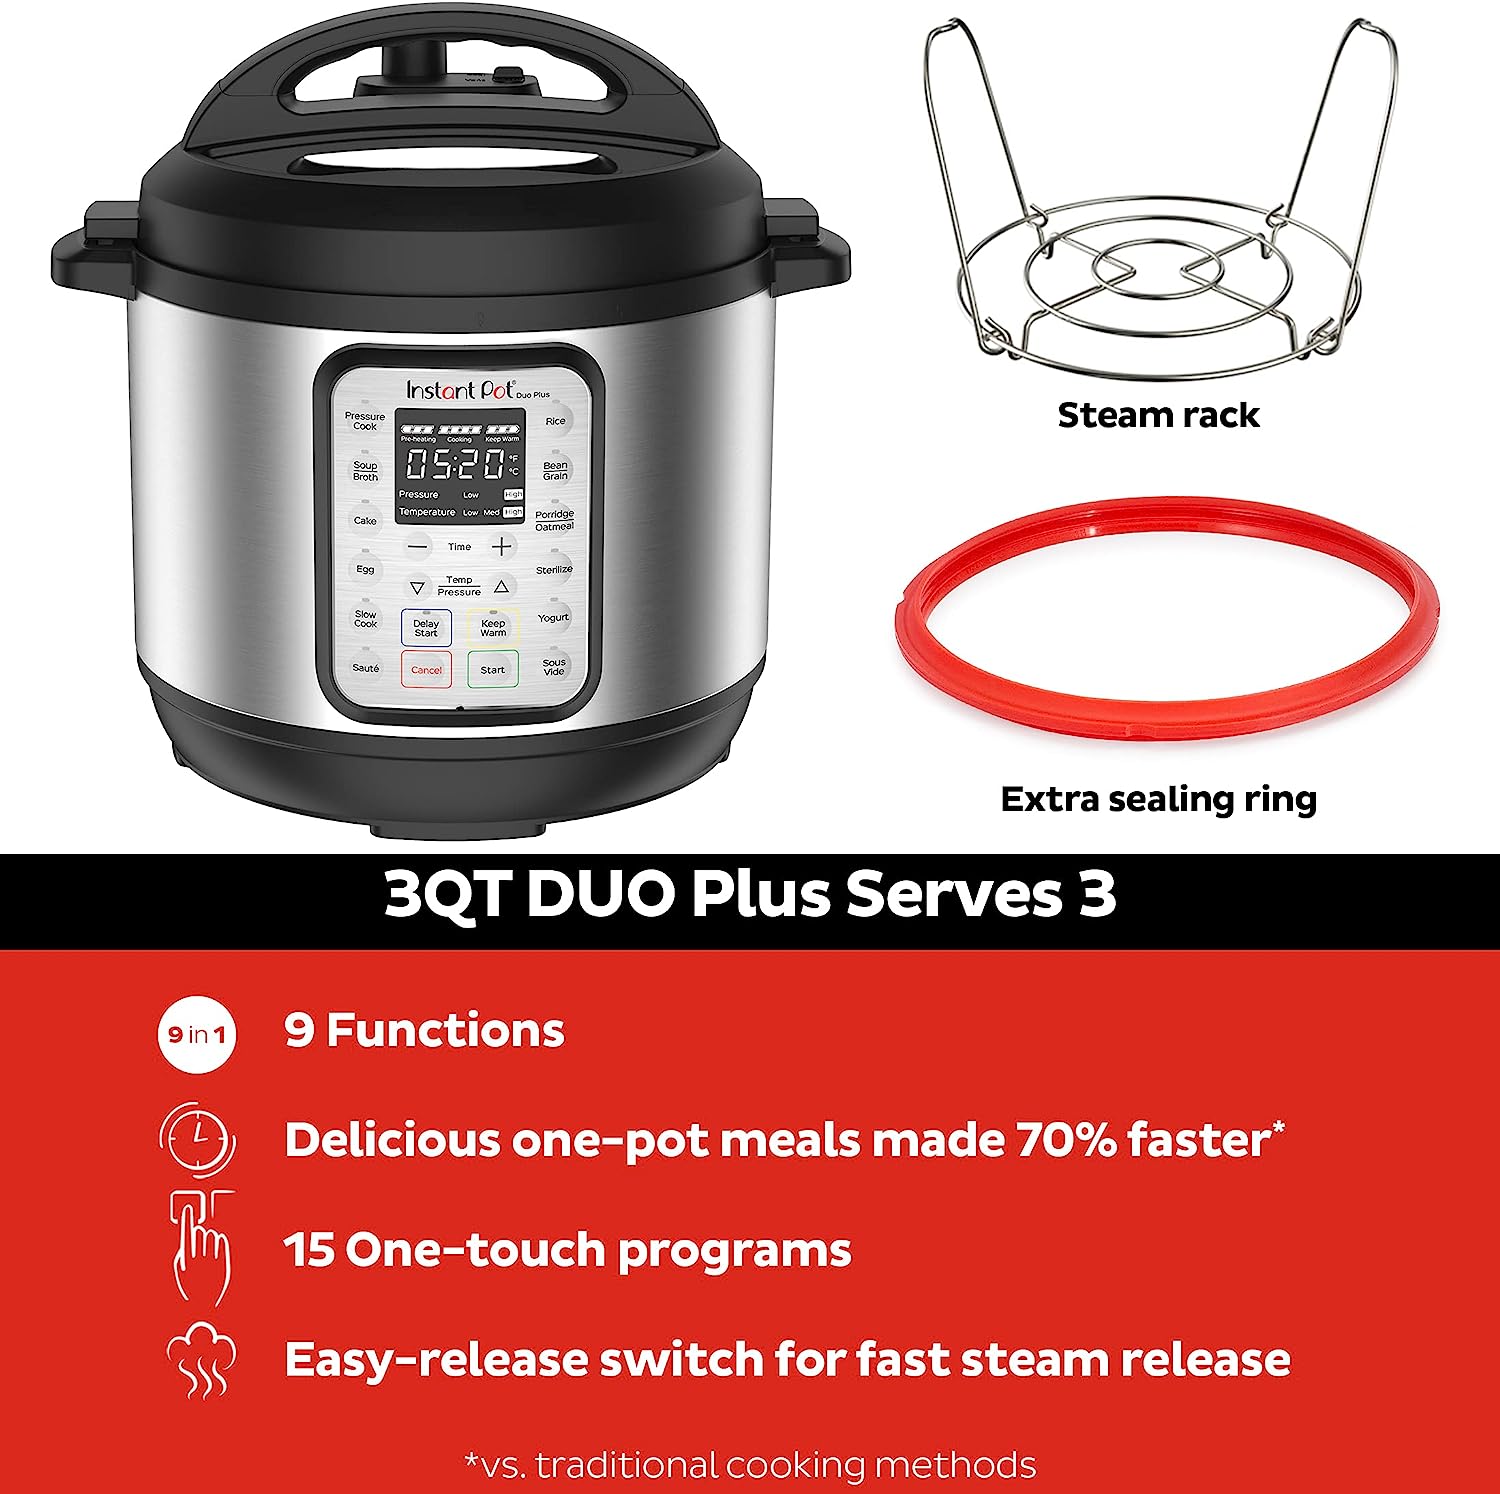 https://bigbigmart.com/wp-content/uploads/2023/06/Instant-Pot-Duo-Plus-9-in-1-Electric-Pressure-Cooker-Slow-Cooker-Rice-Cooker-Steamer-Saute-Yogurt-Maker-Warmer-Sterilizer-Includes-Free-App-with-over-1900-Recipes-Stainless-Steel-3-Quart1.jpg